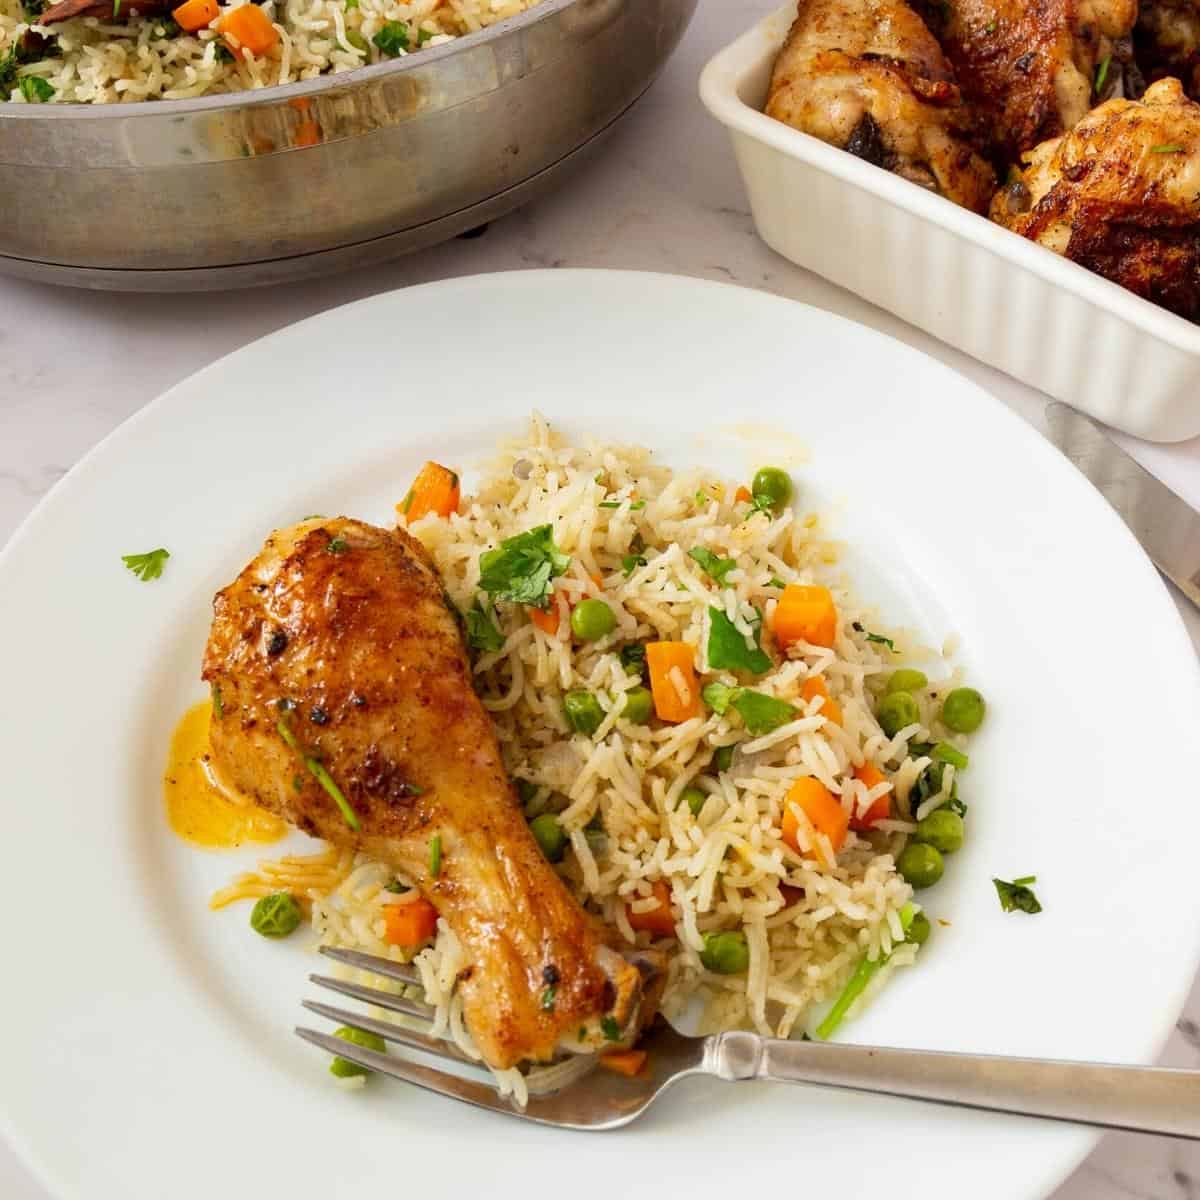 Vegetable rice with baked chicken drumstick on a plate.